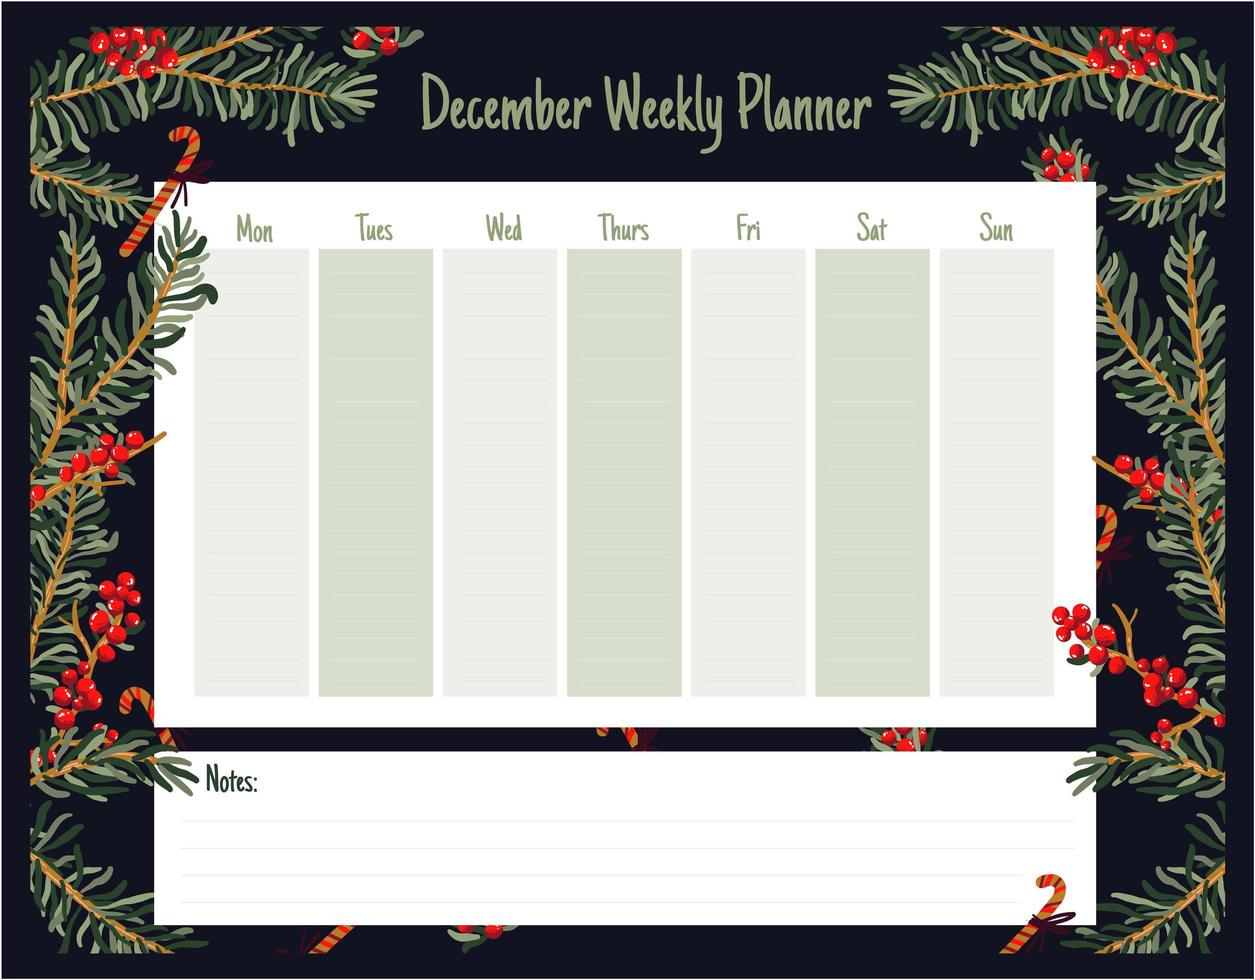 Weekly daily cute Christmas planner vector